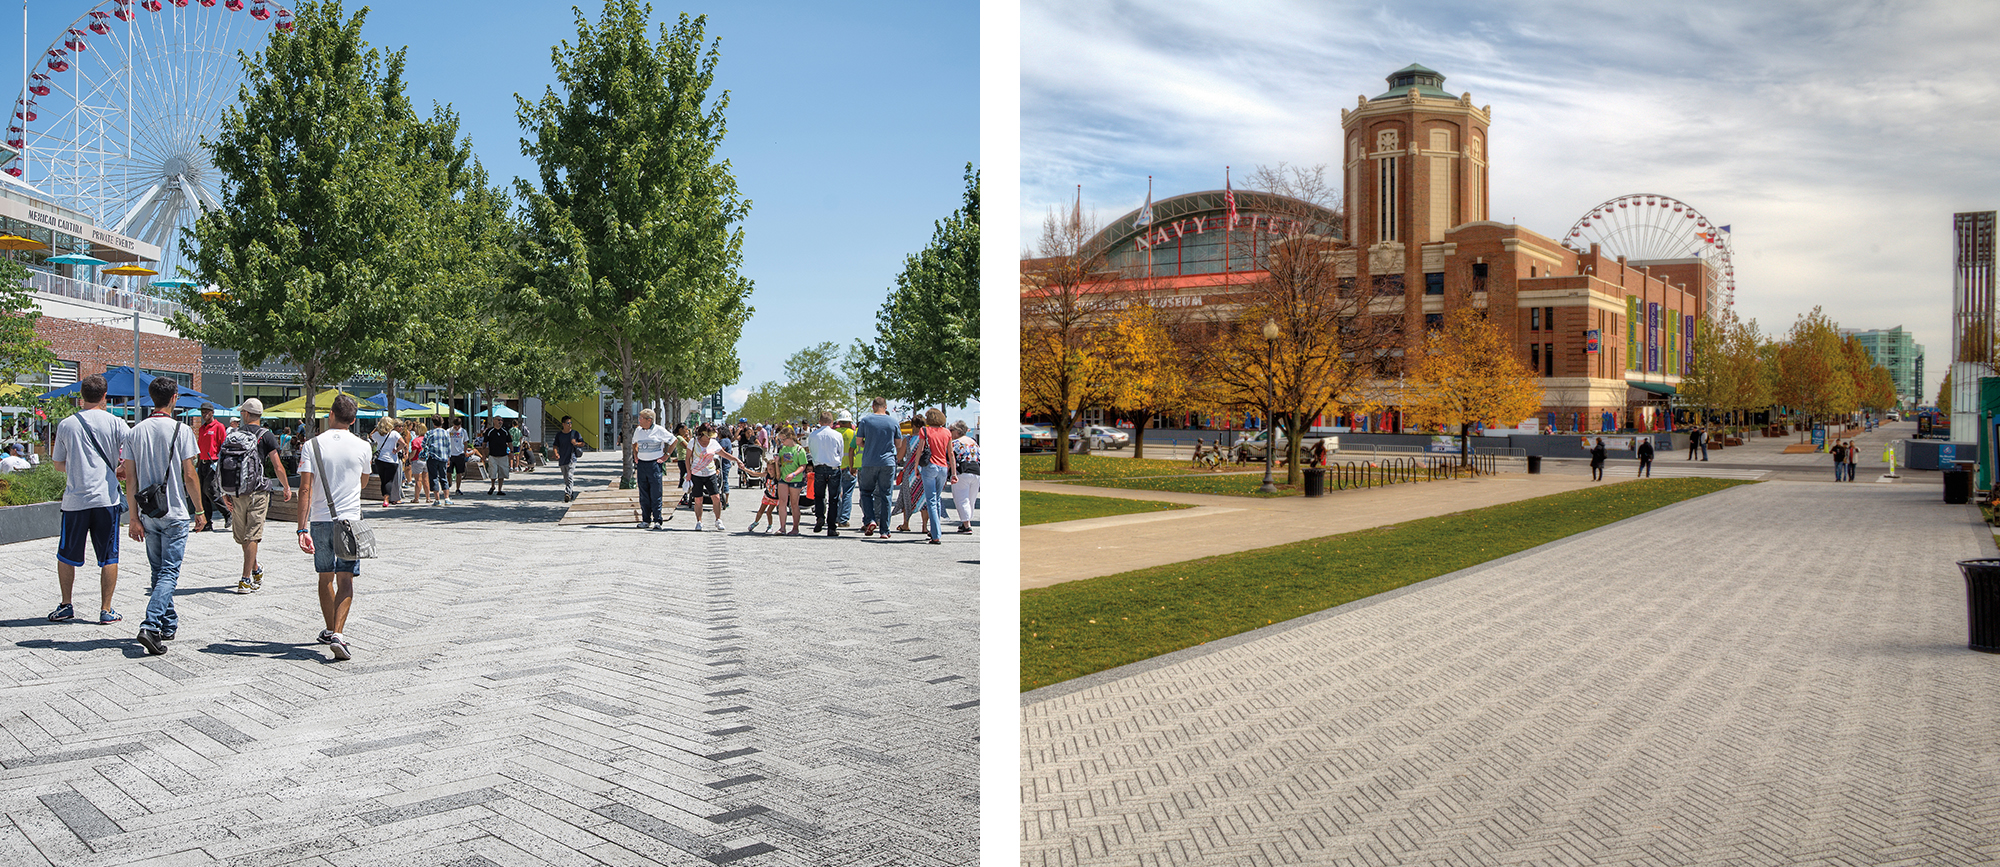 Pavers and permeable pavers covering a significant portion of Chicago’s Navy Pier helped the project earn SITES certification, as the pavers were such a large part of the overall renovation project.